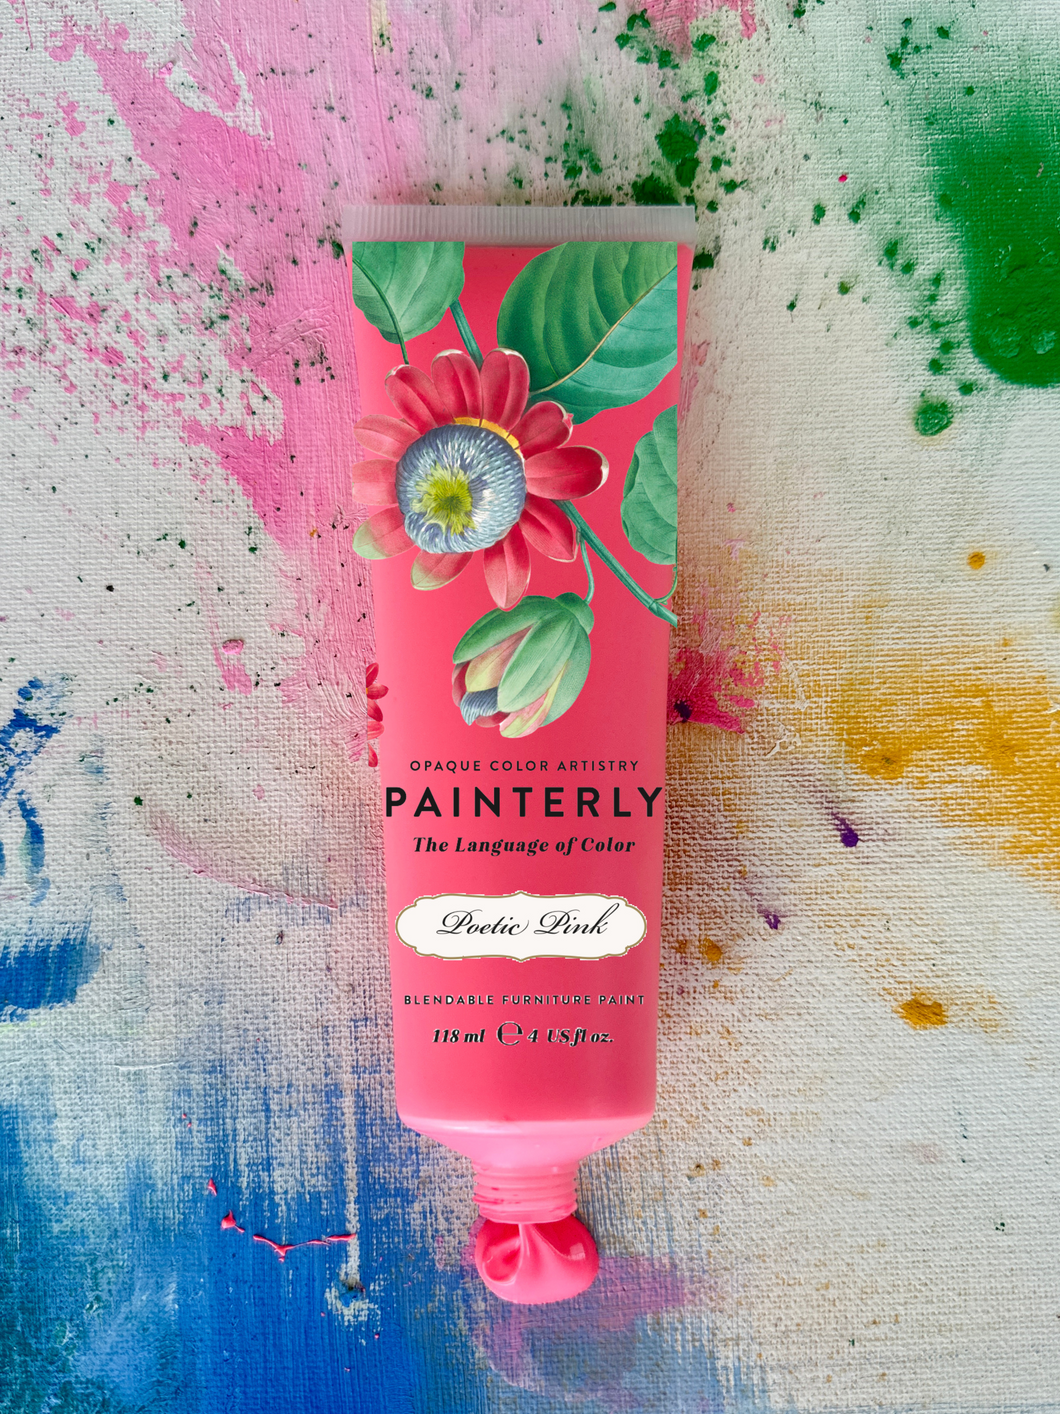 DIY Painterly Paint Poetic Pink by Debi's Design Diary